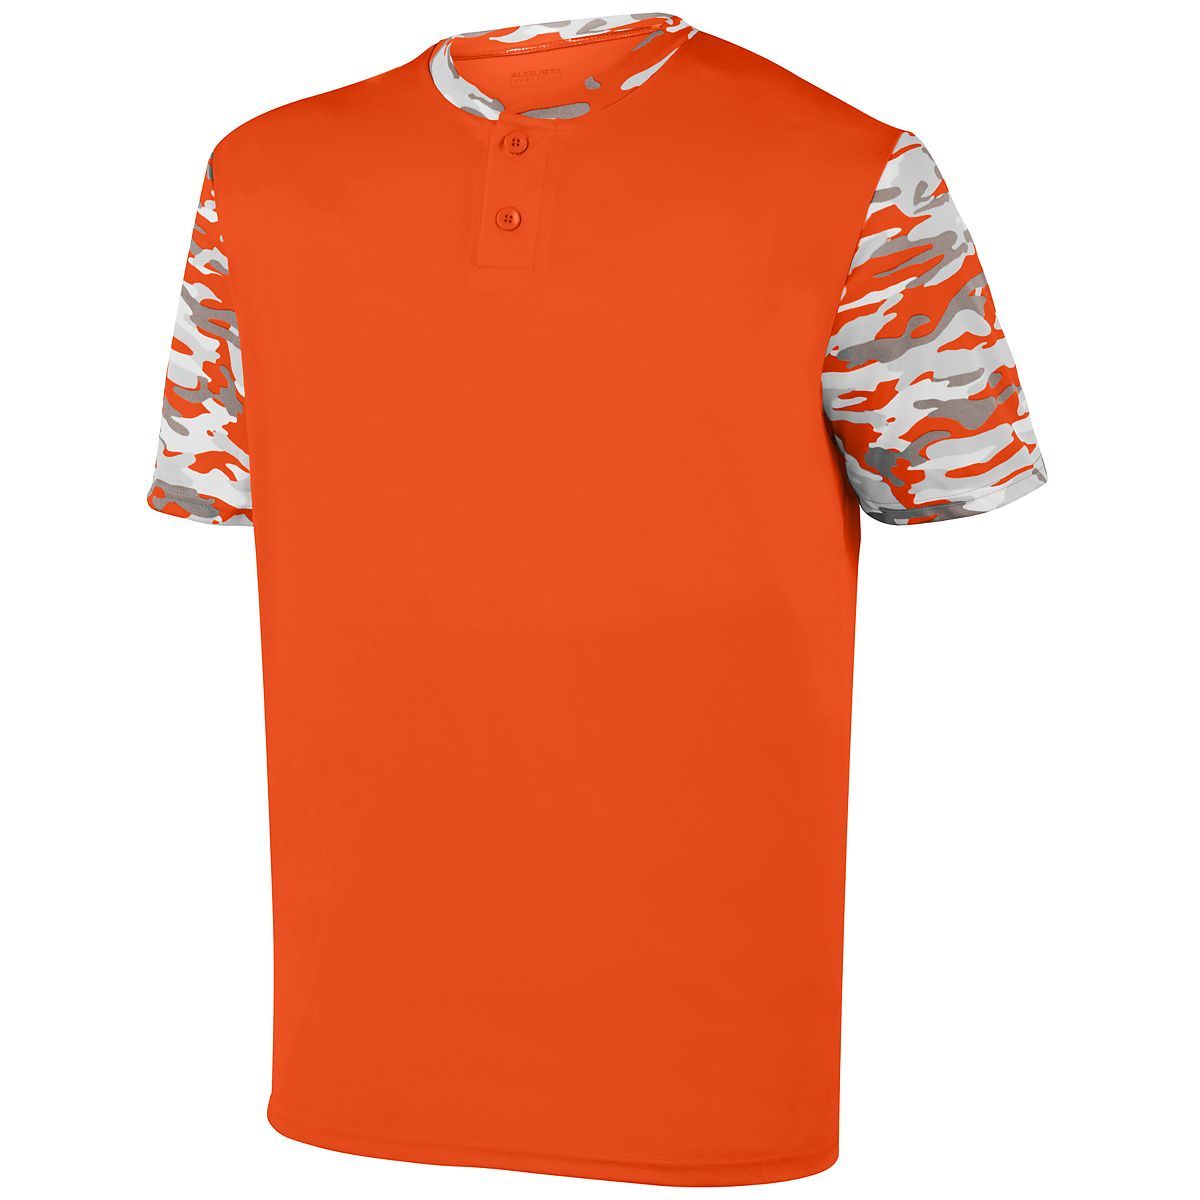 Augusta Sportswear Pop Fly Jersey in Orange/Orange Mod  -Part of the Adult, Adult-Jersey, Augusta-Products, Baseball, Shirts, All-Sports, All-Sports-1 product lines at KanaleyCreations.com